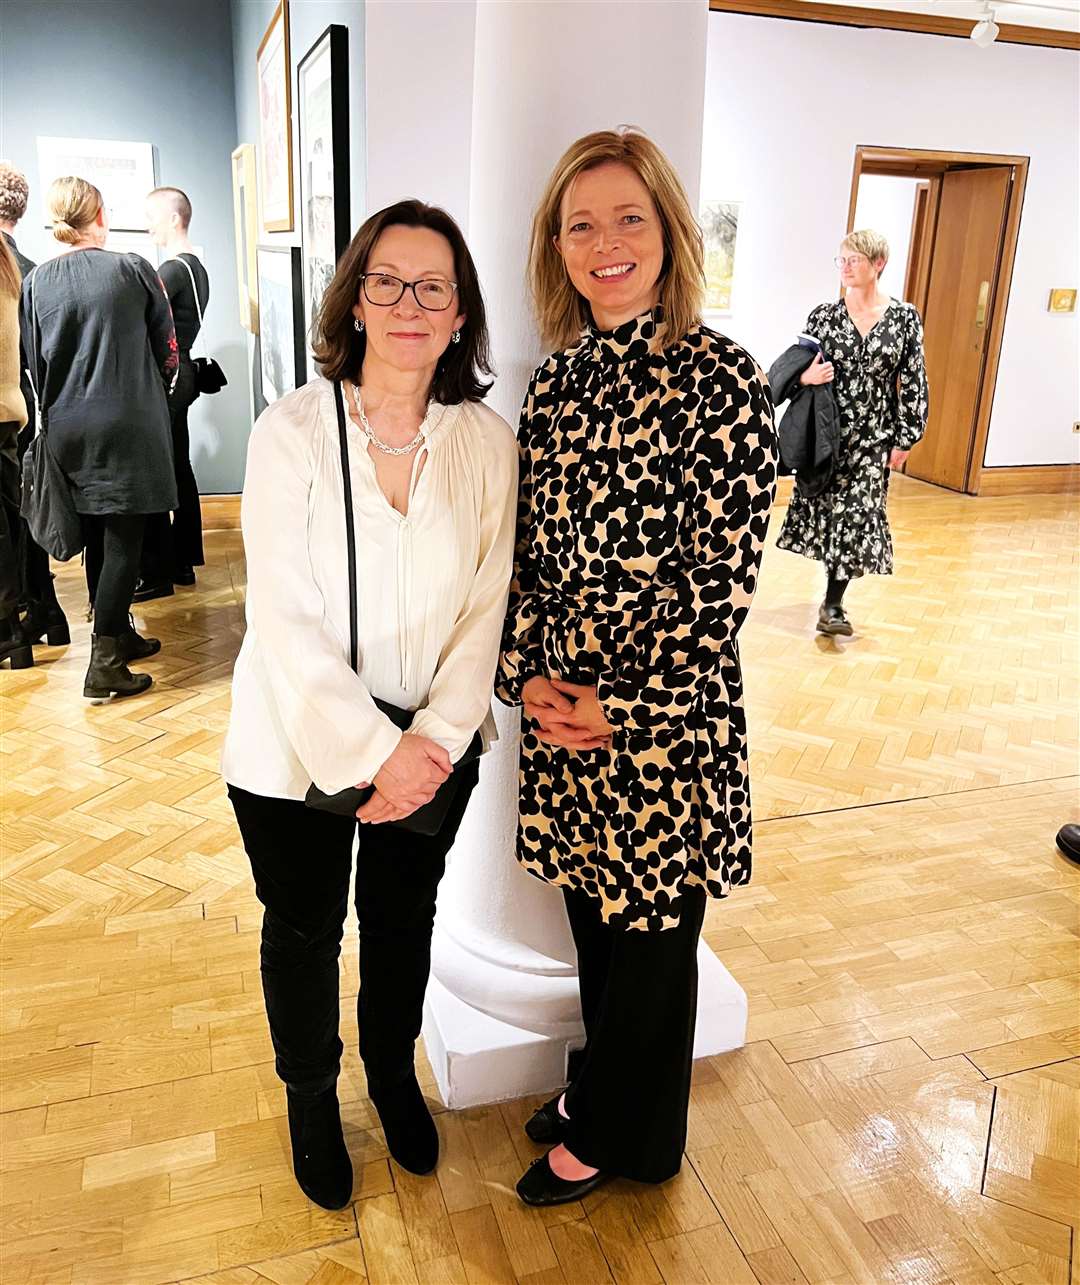 Caithness artists Magi Sinclair (left) and Lindsey Gallacher were delighted to be featured at the national art show and receive the recognition.